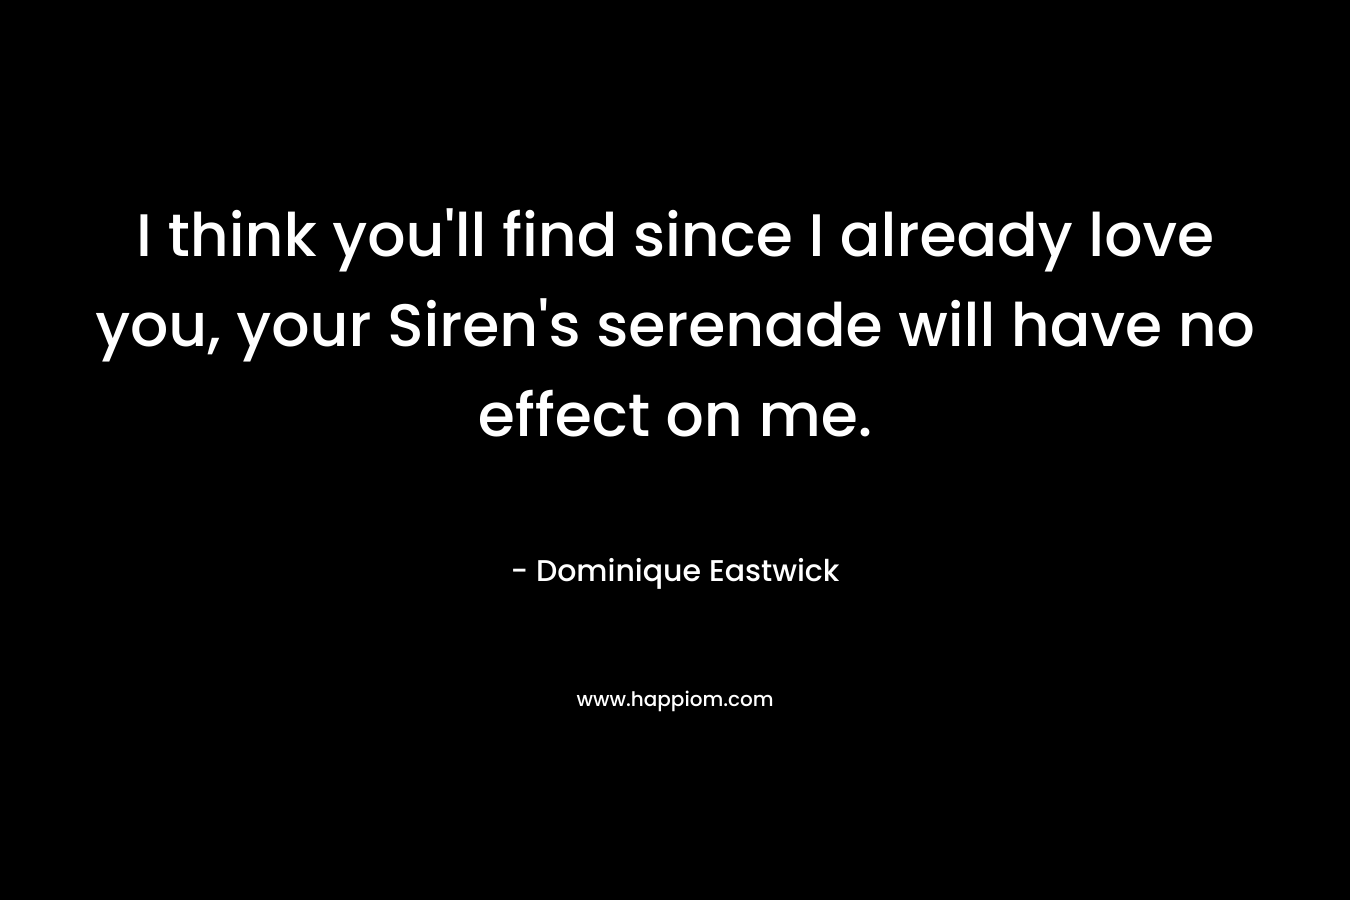 I think you'll find since I already love you, your Siren's serenade will have no effect on me.